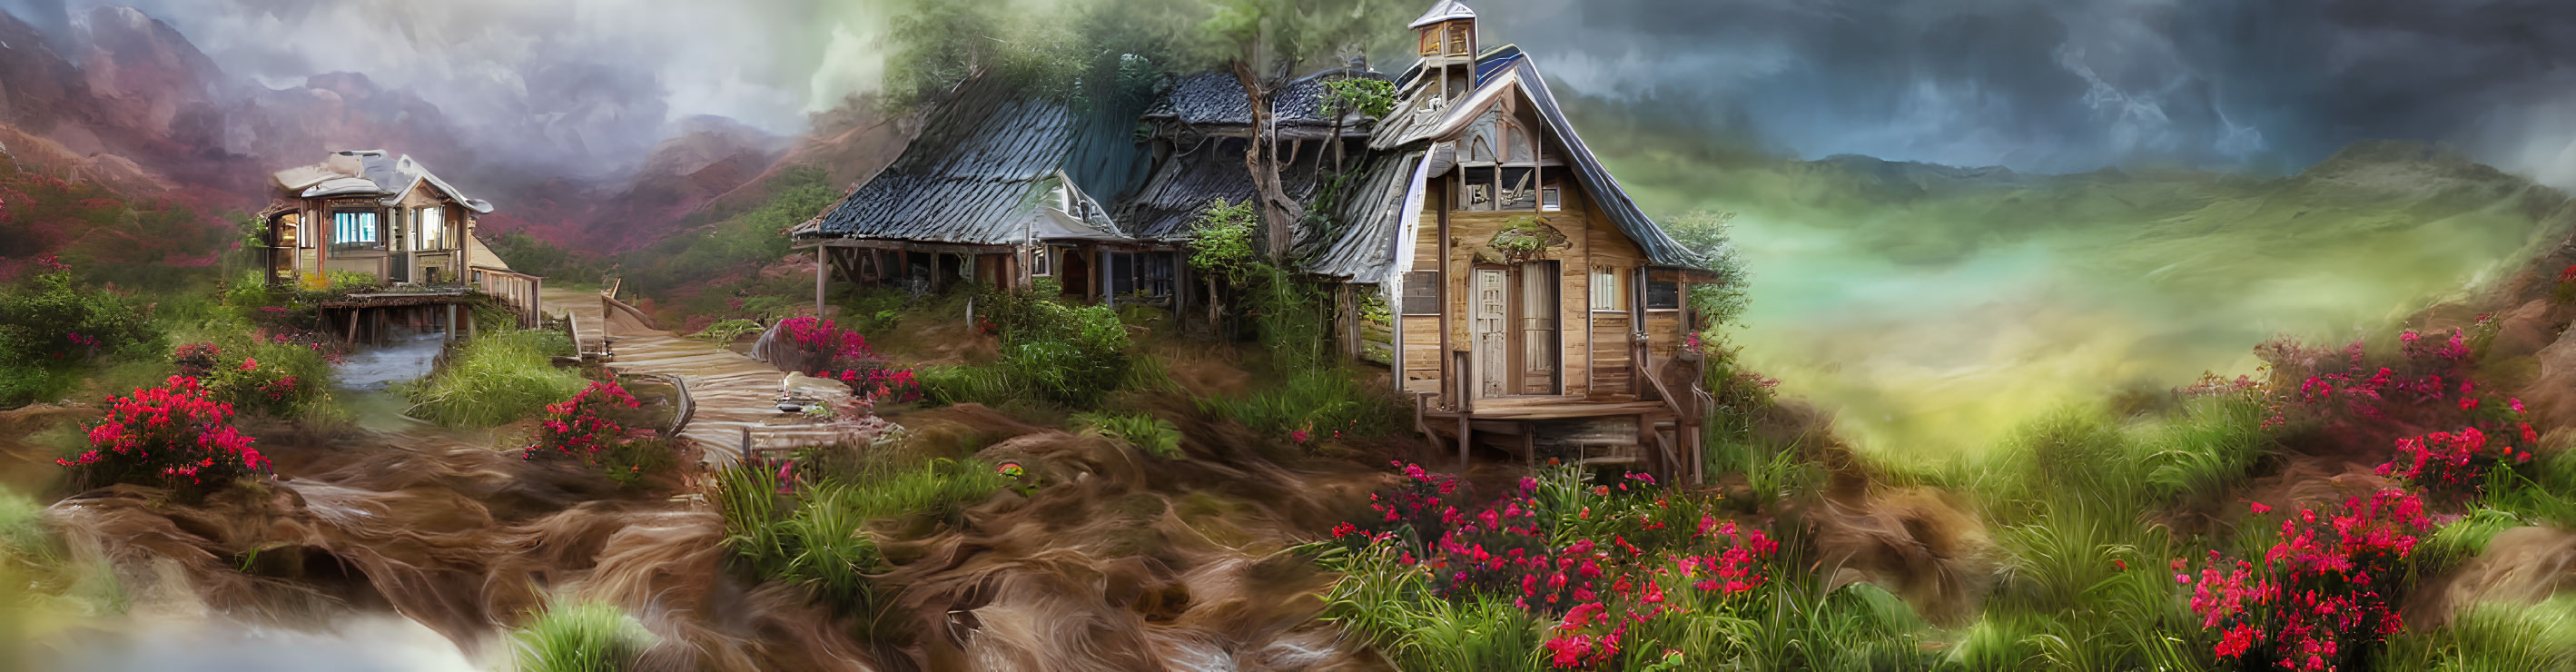 Rustic wooden houses near turbulent river in mountain landscape with red flowers under stormy sky